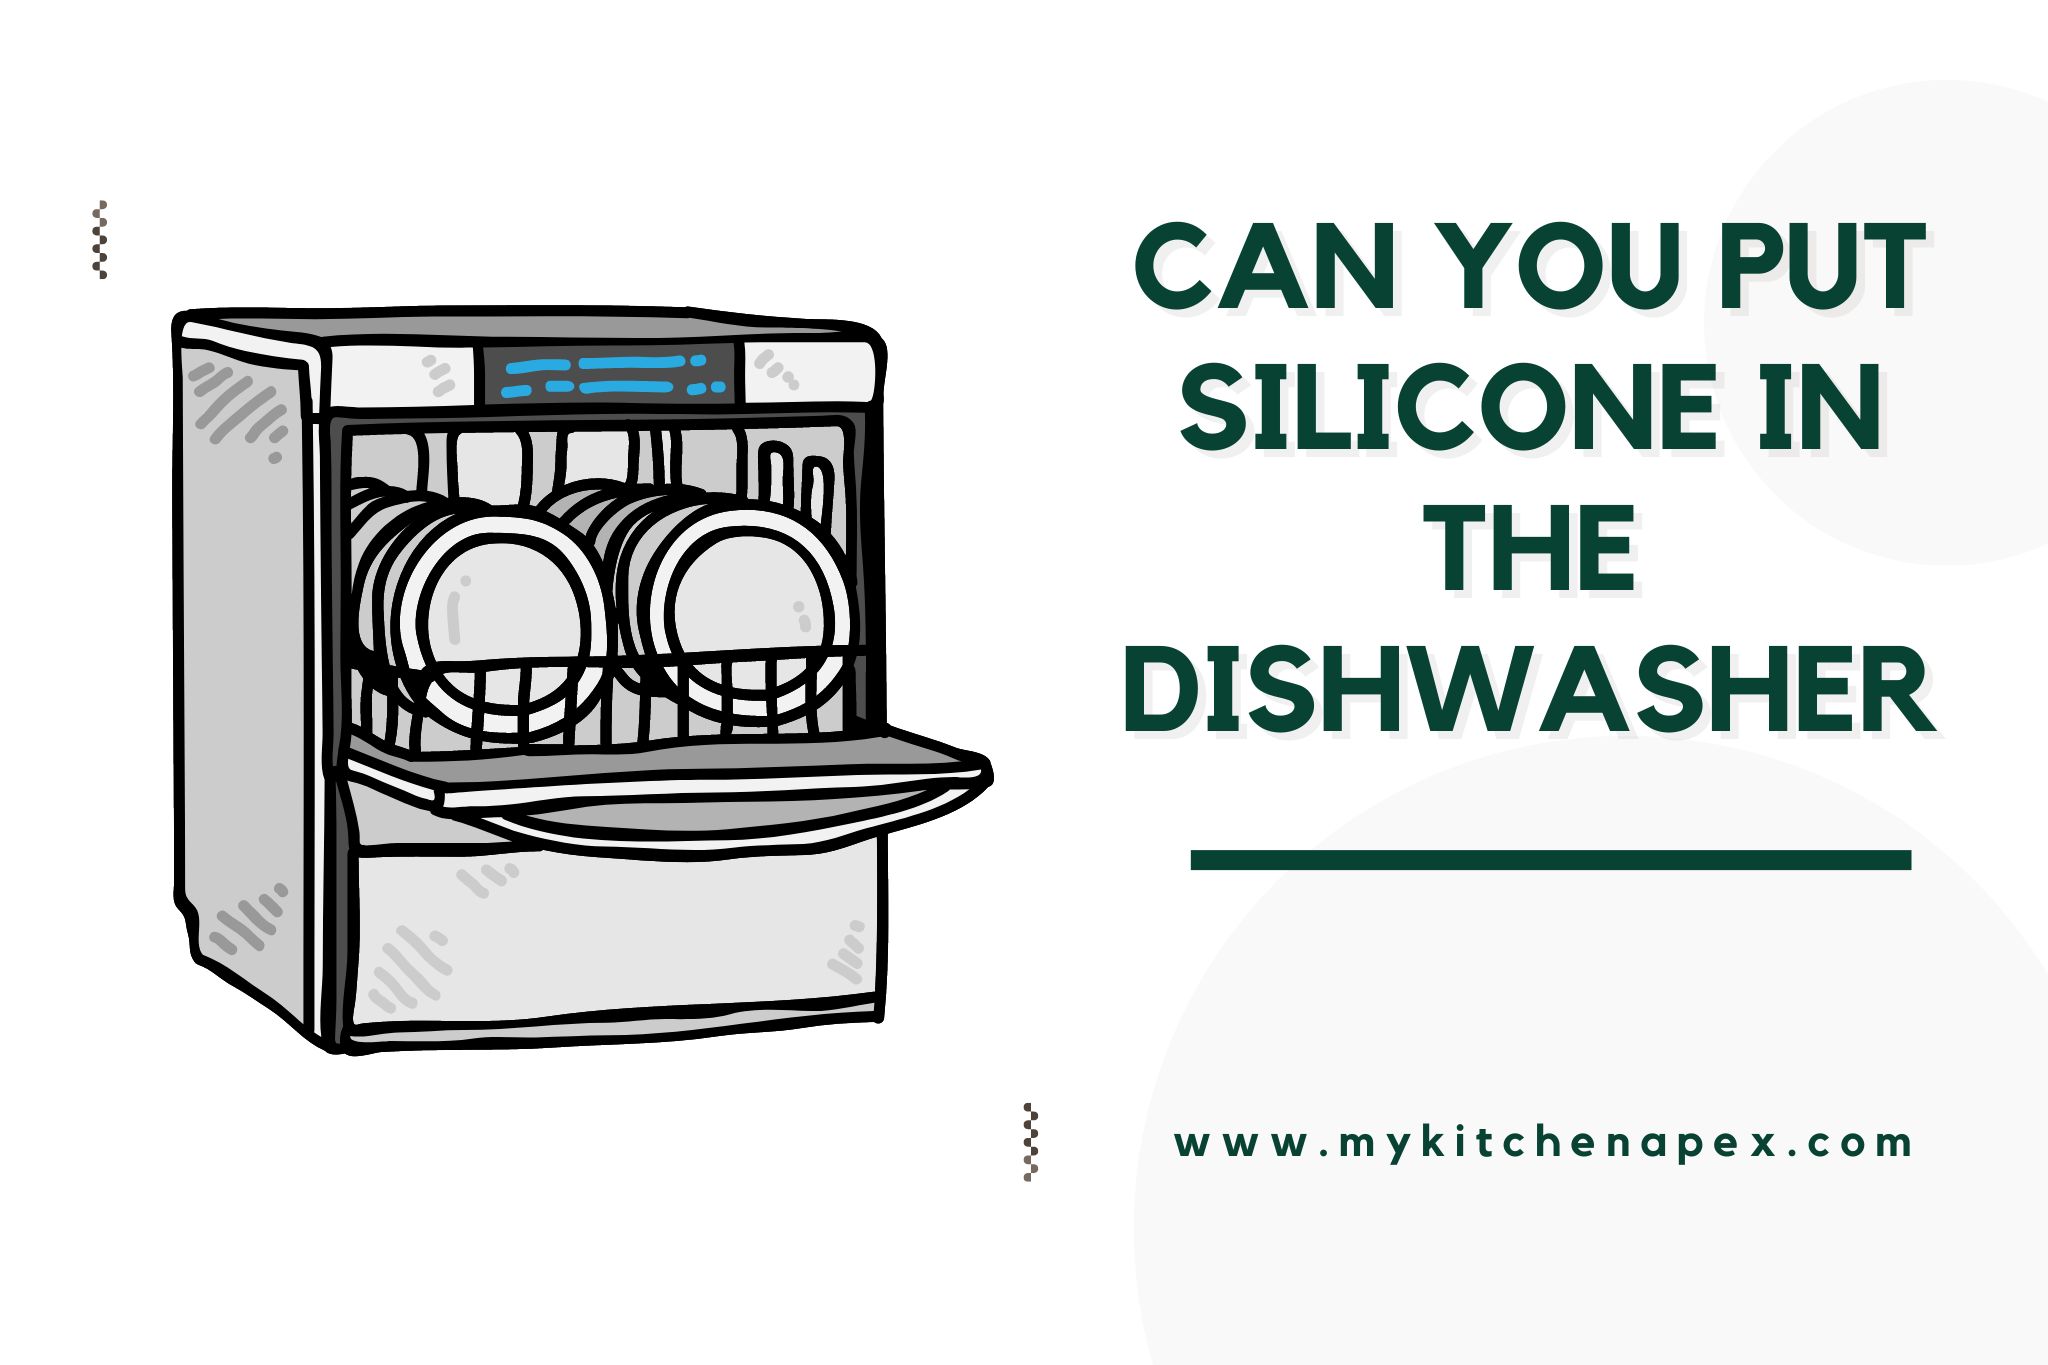 can you put silicone in the dishwasher